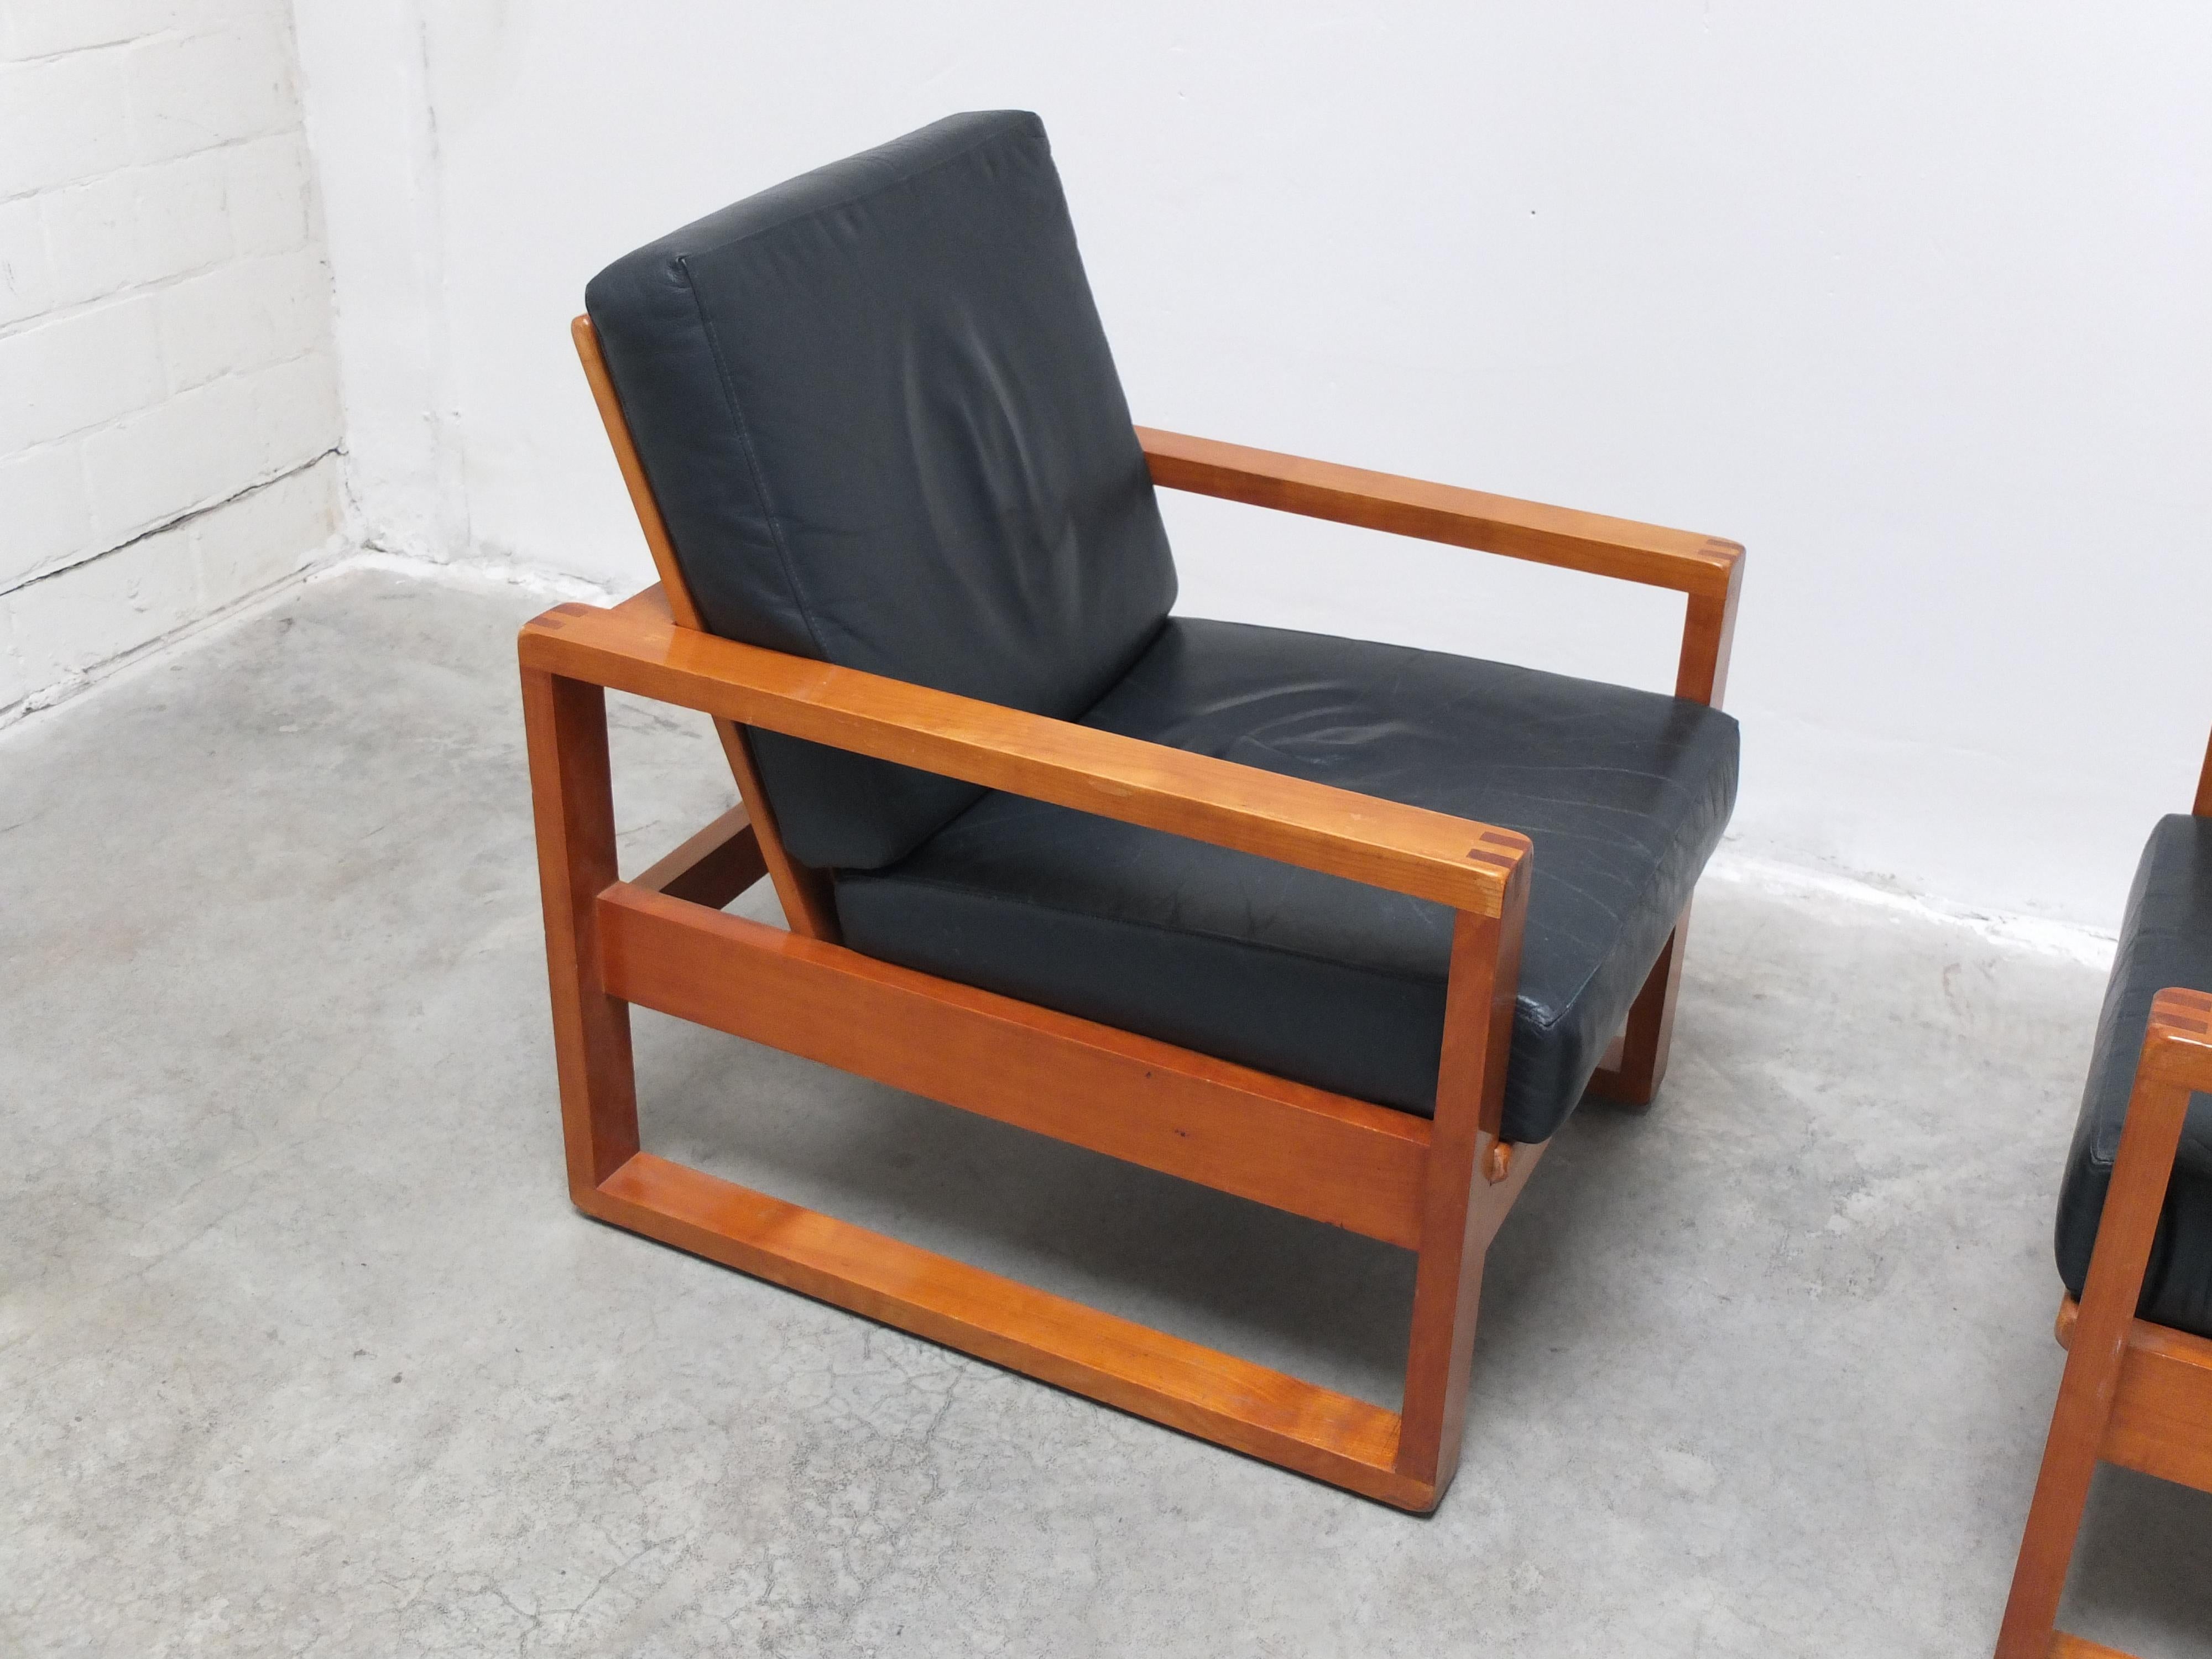 Leather Unique Pair of Modernist Lounge Chairs by Van Den Berghe-Pauvers, 1960s For Sale